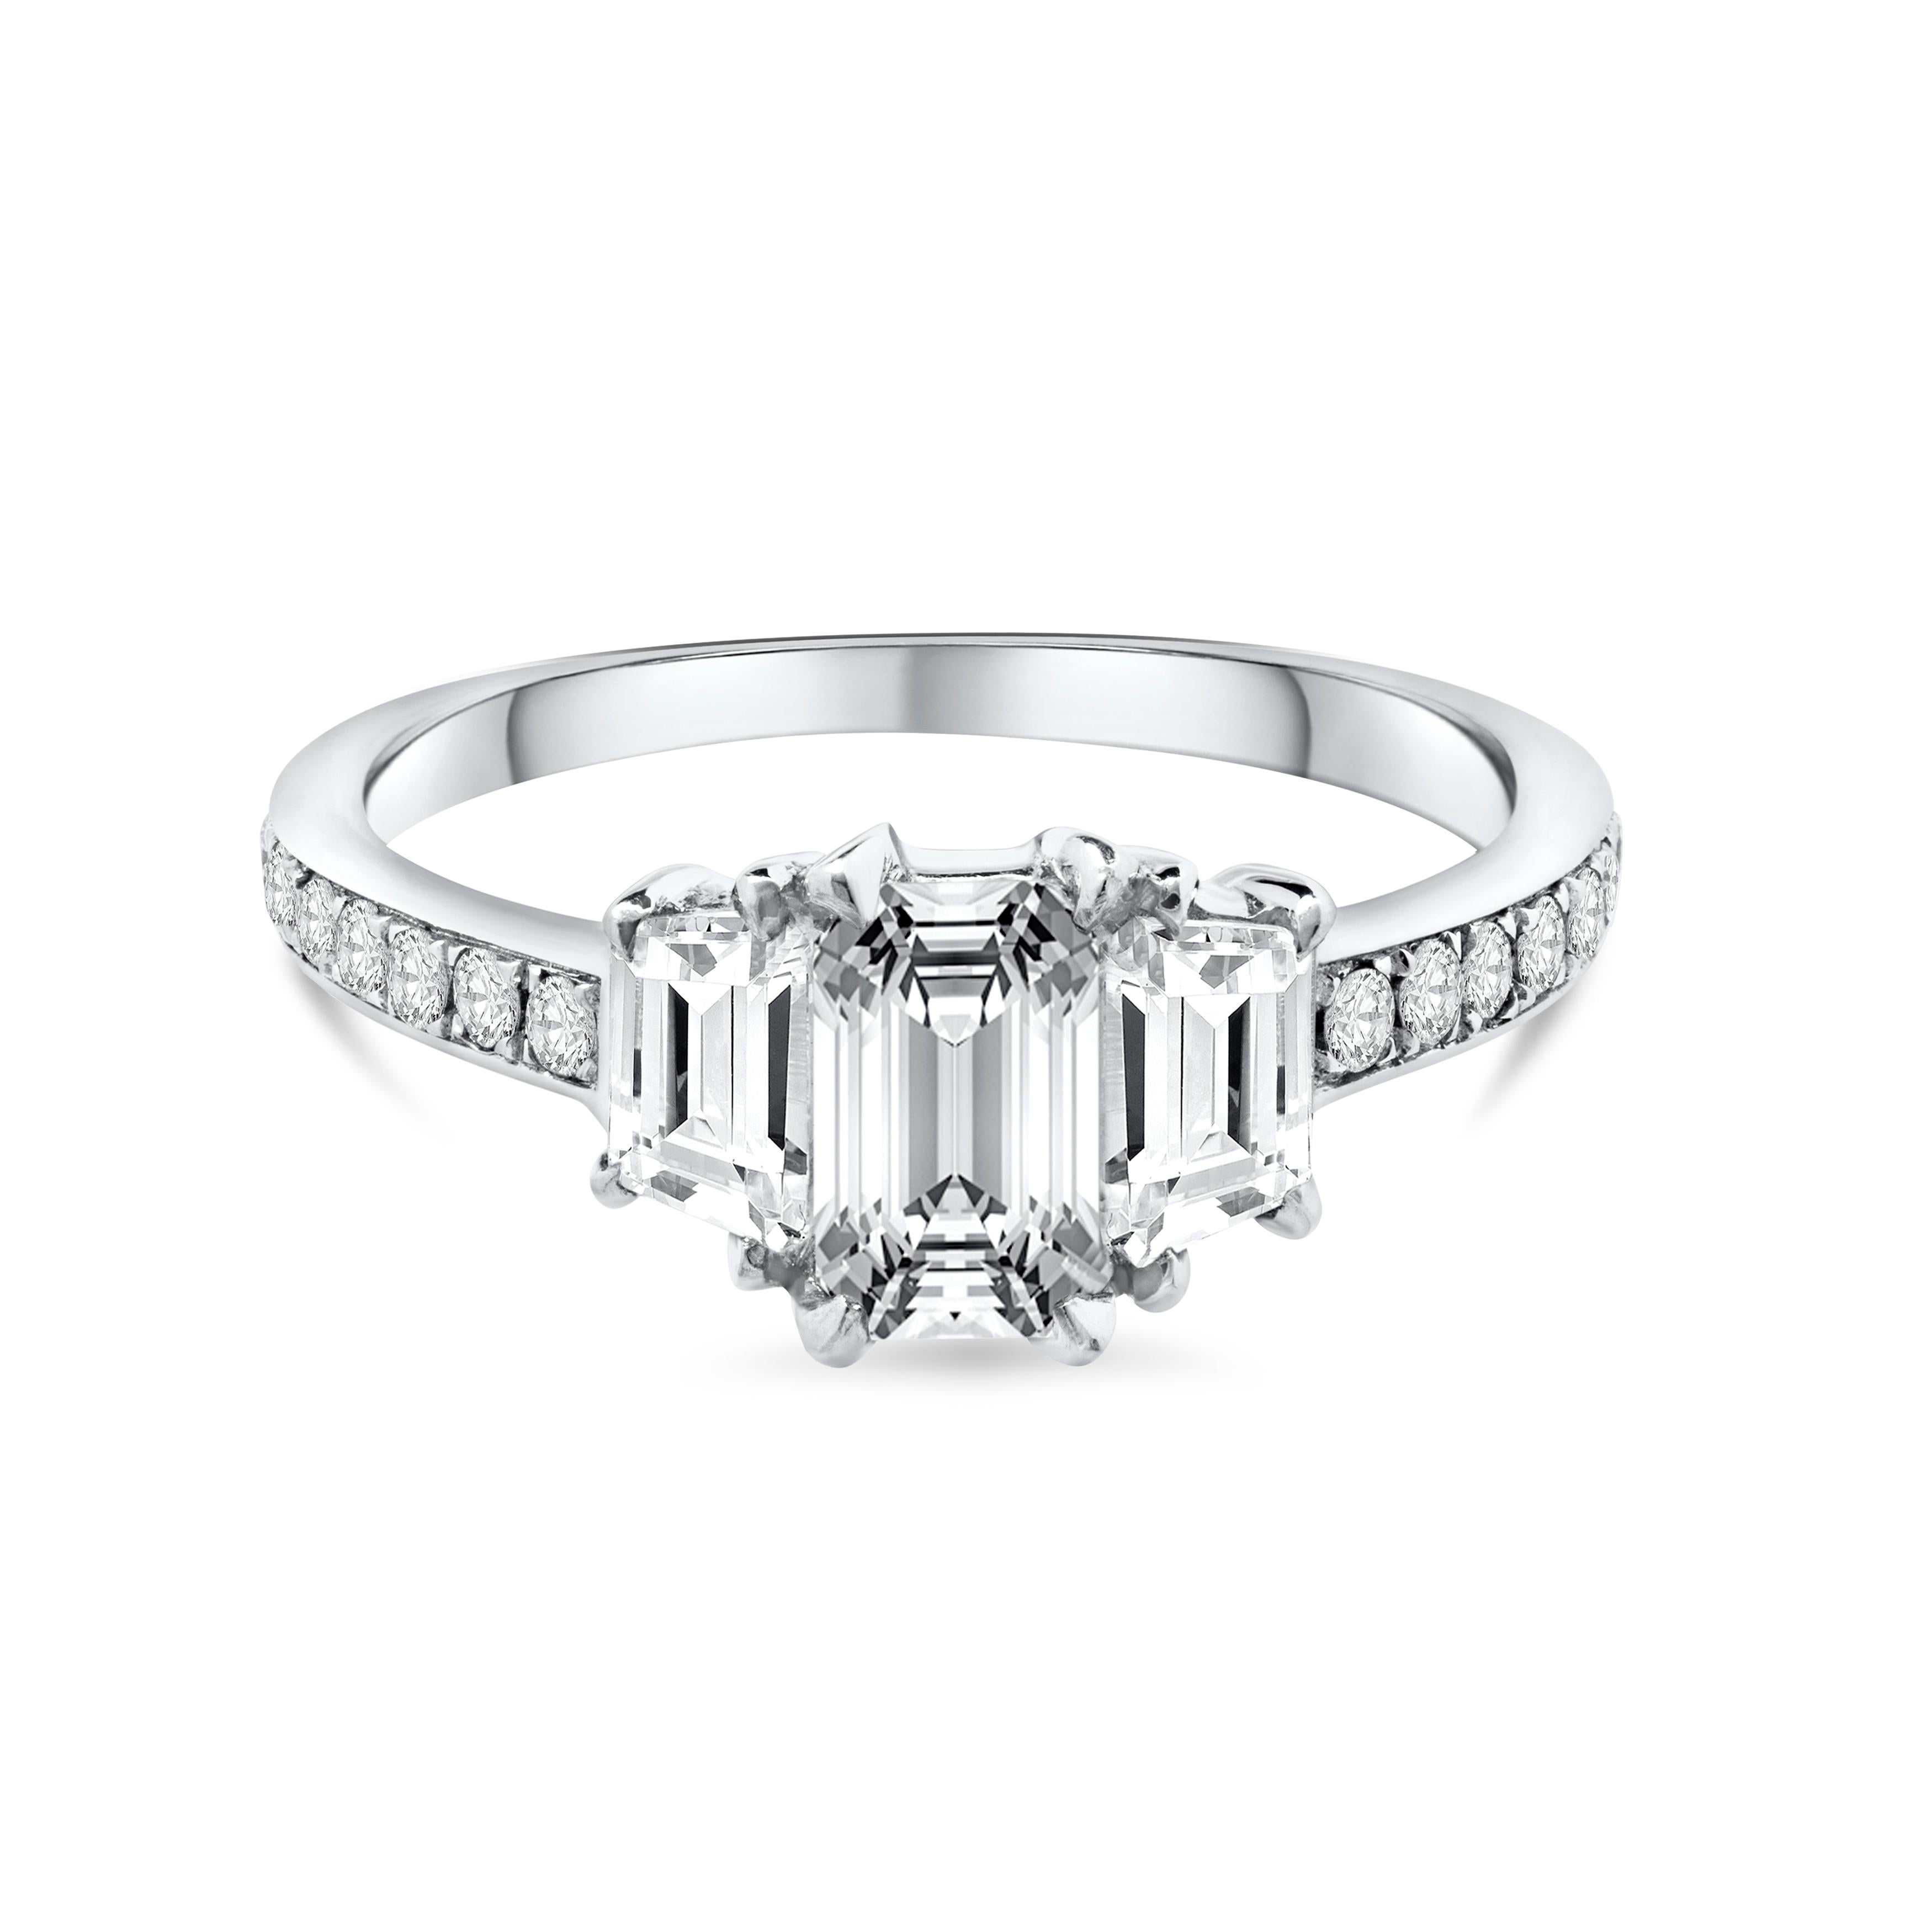 Classic and elegant in style, this three stone ring is set with a gorgeous 0.70 carat emerald cut diamond center certified by GIA as F color and SI1 clarity.  Flanked by two trapezoid weighing 0.45 carat total. Set on a half eternity accented with